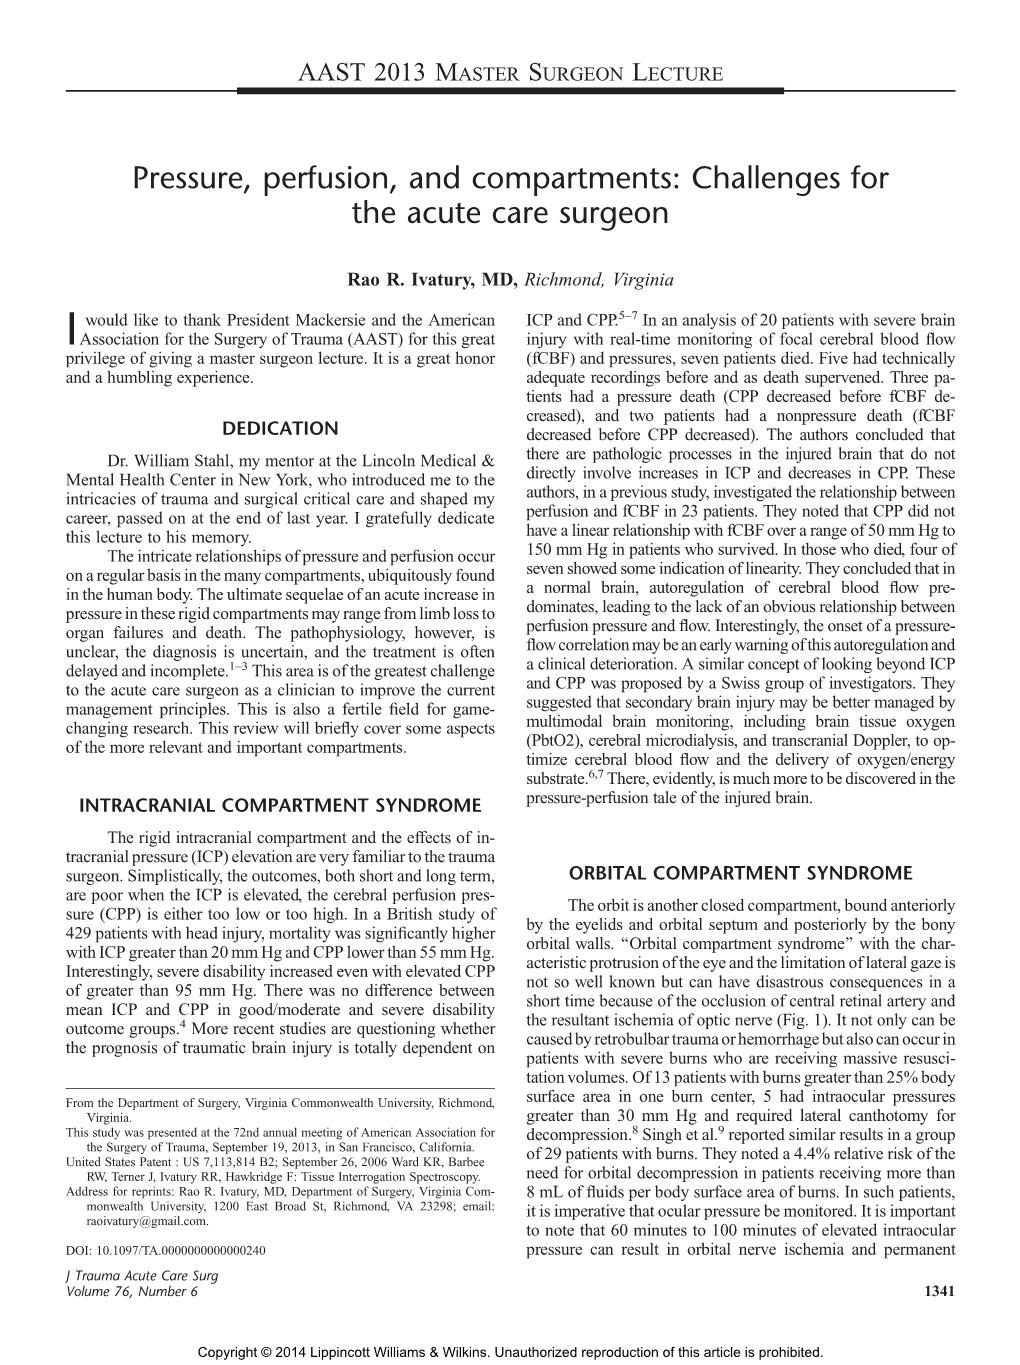 Pressure, Perfusion, and Compartments: Challenges for the Acute Care Surgeon